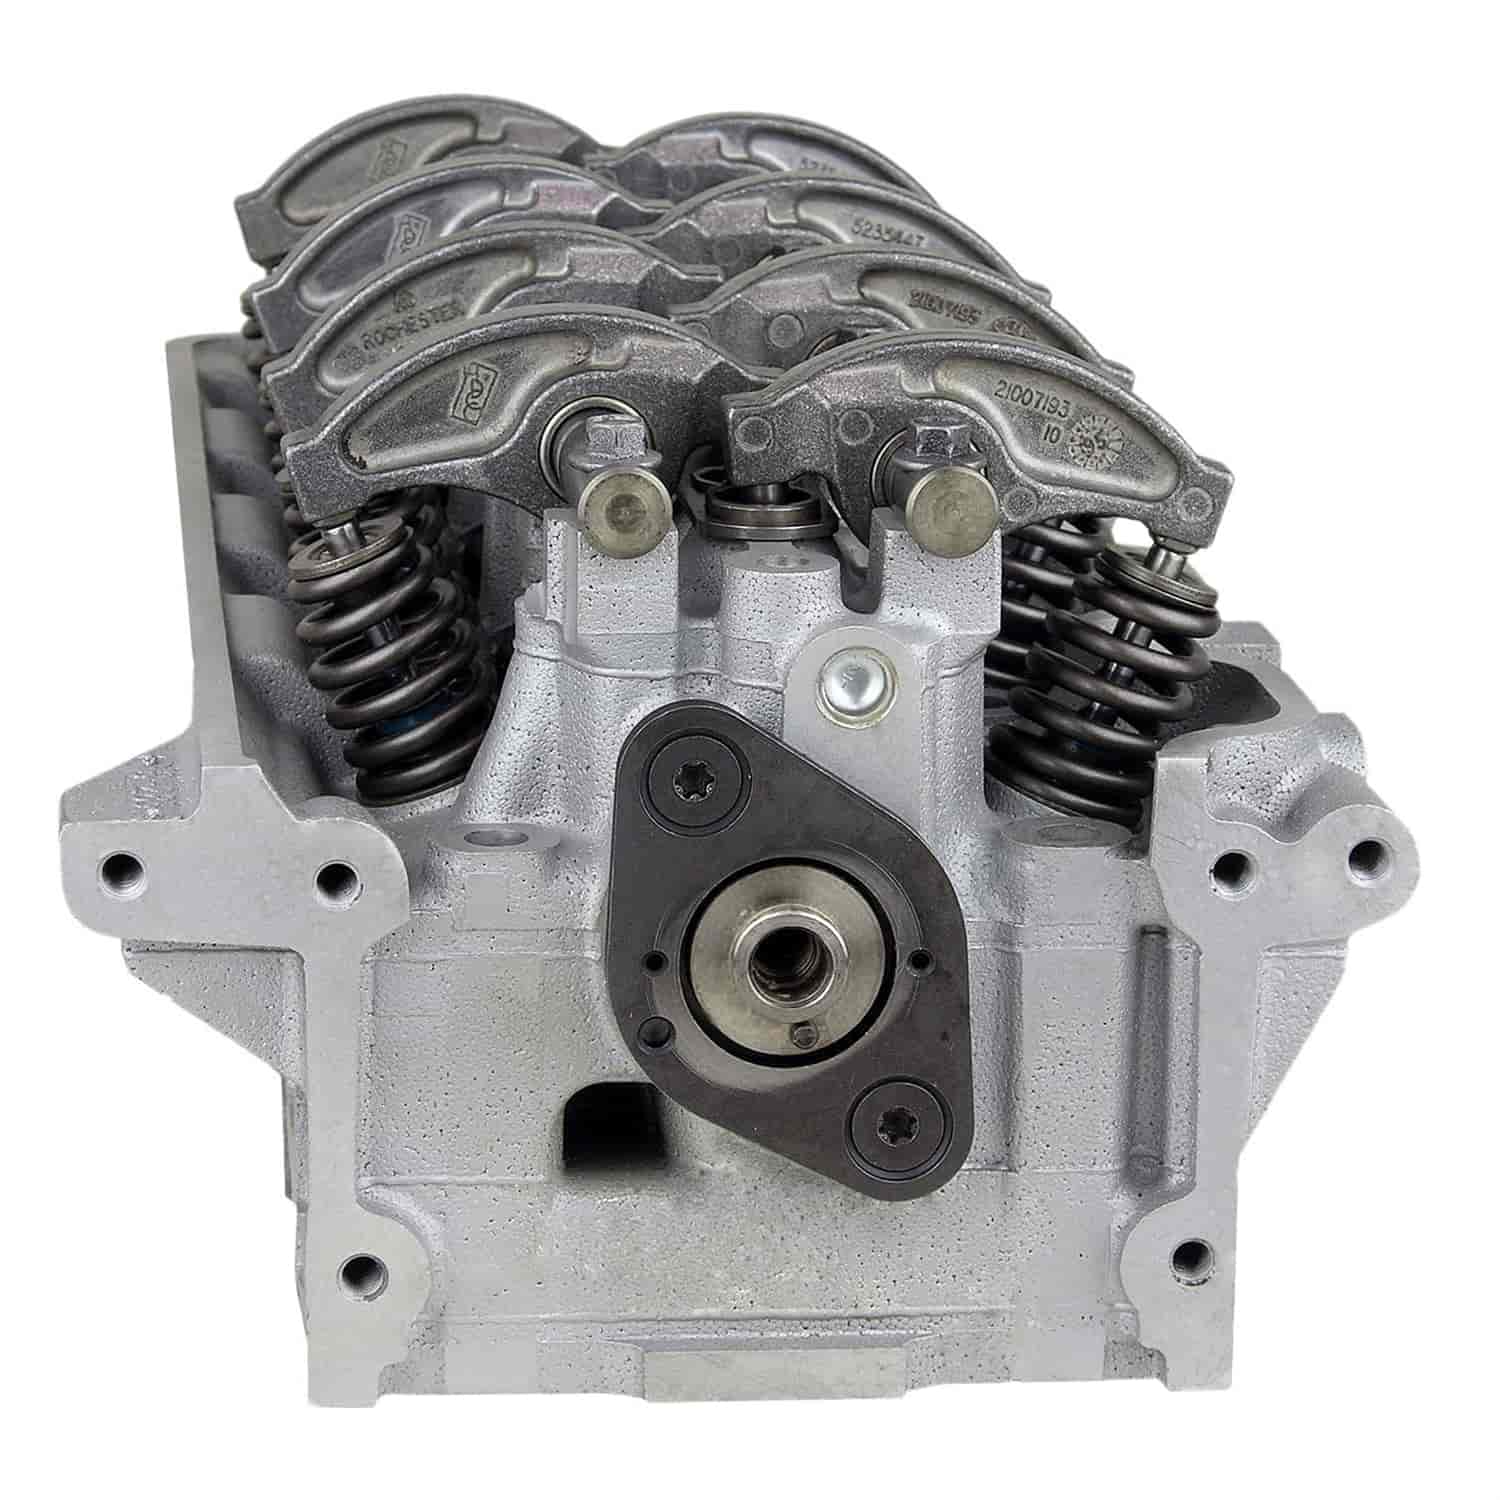 Remanufactured Cylinder Head for 1995-1999 Saturn with SOHC